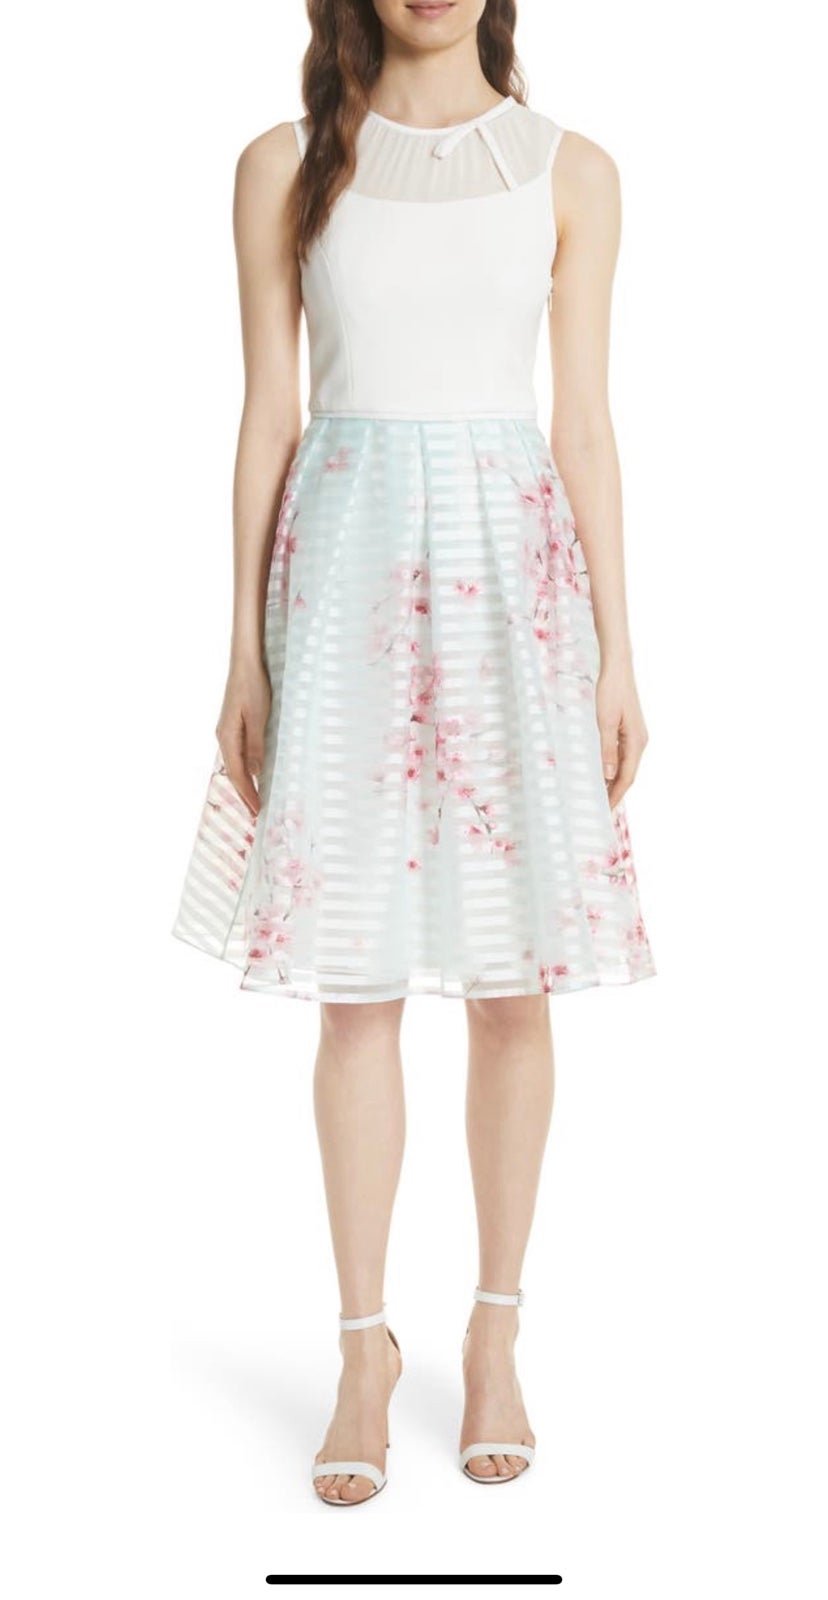 Personality ted baker London soft blossom fit & flare d